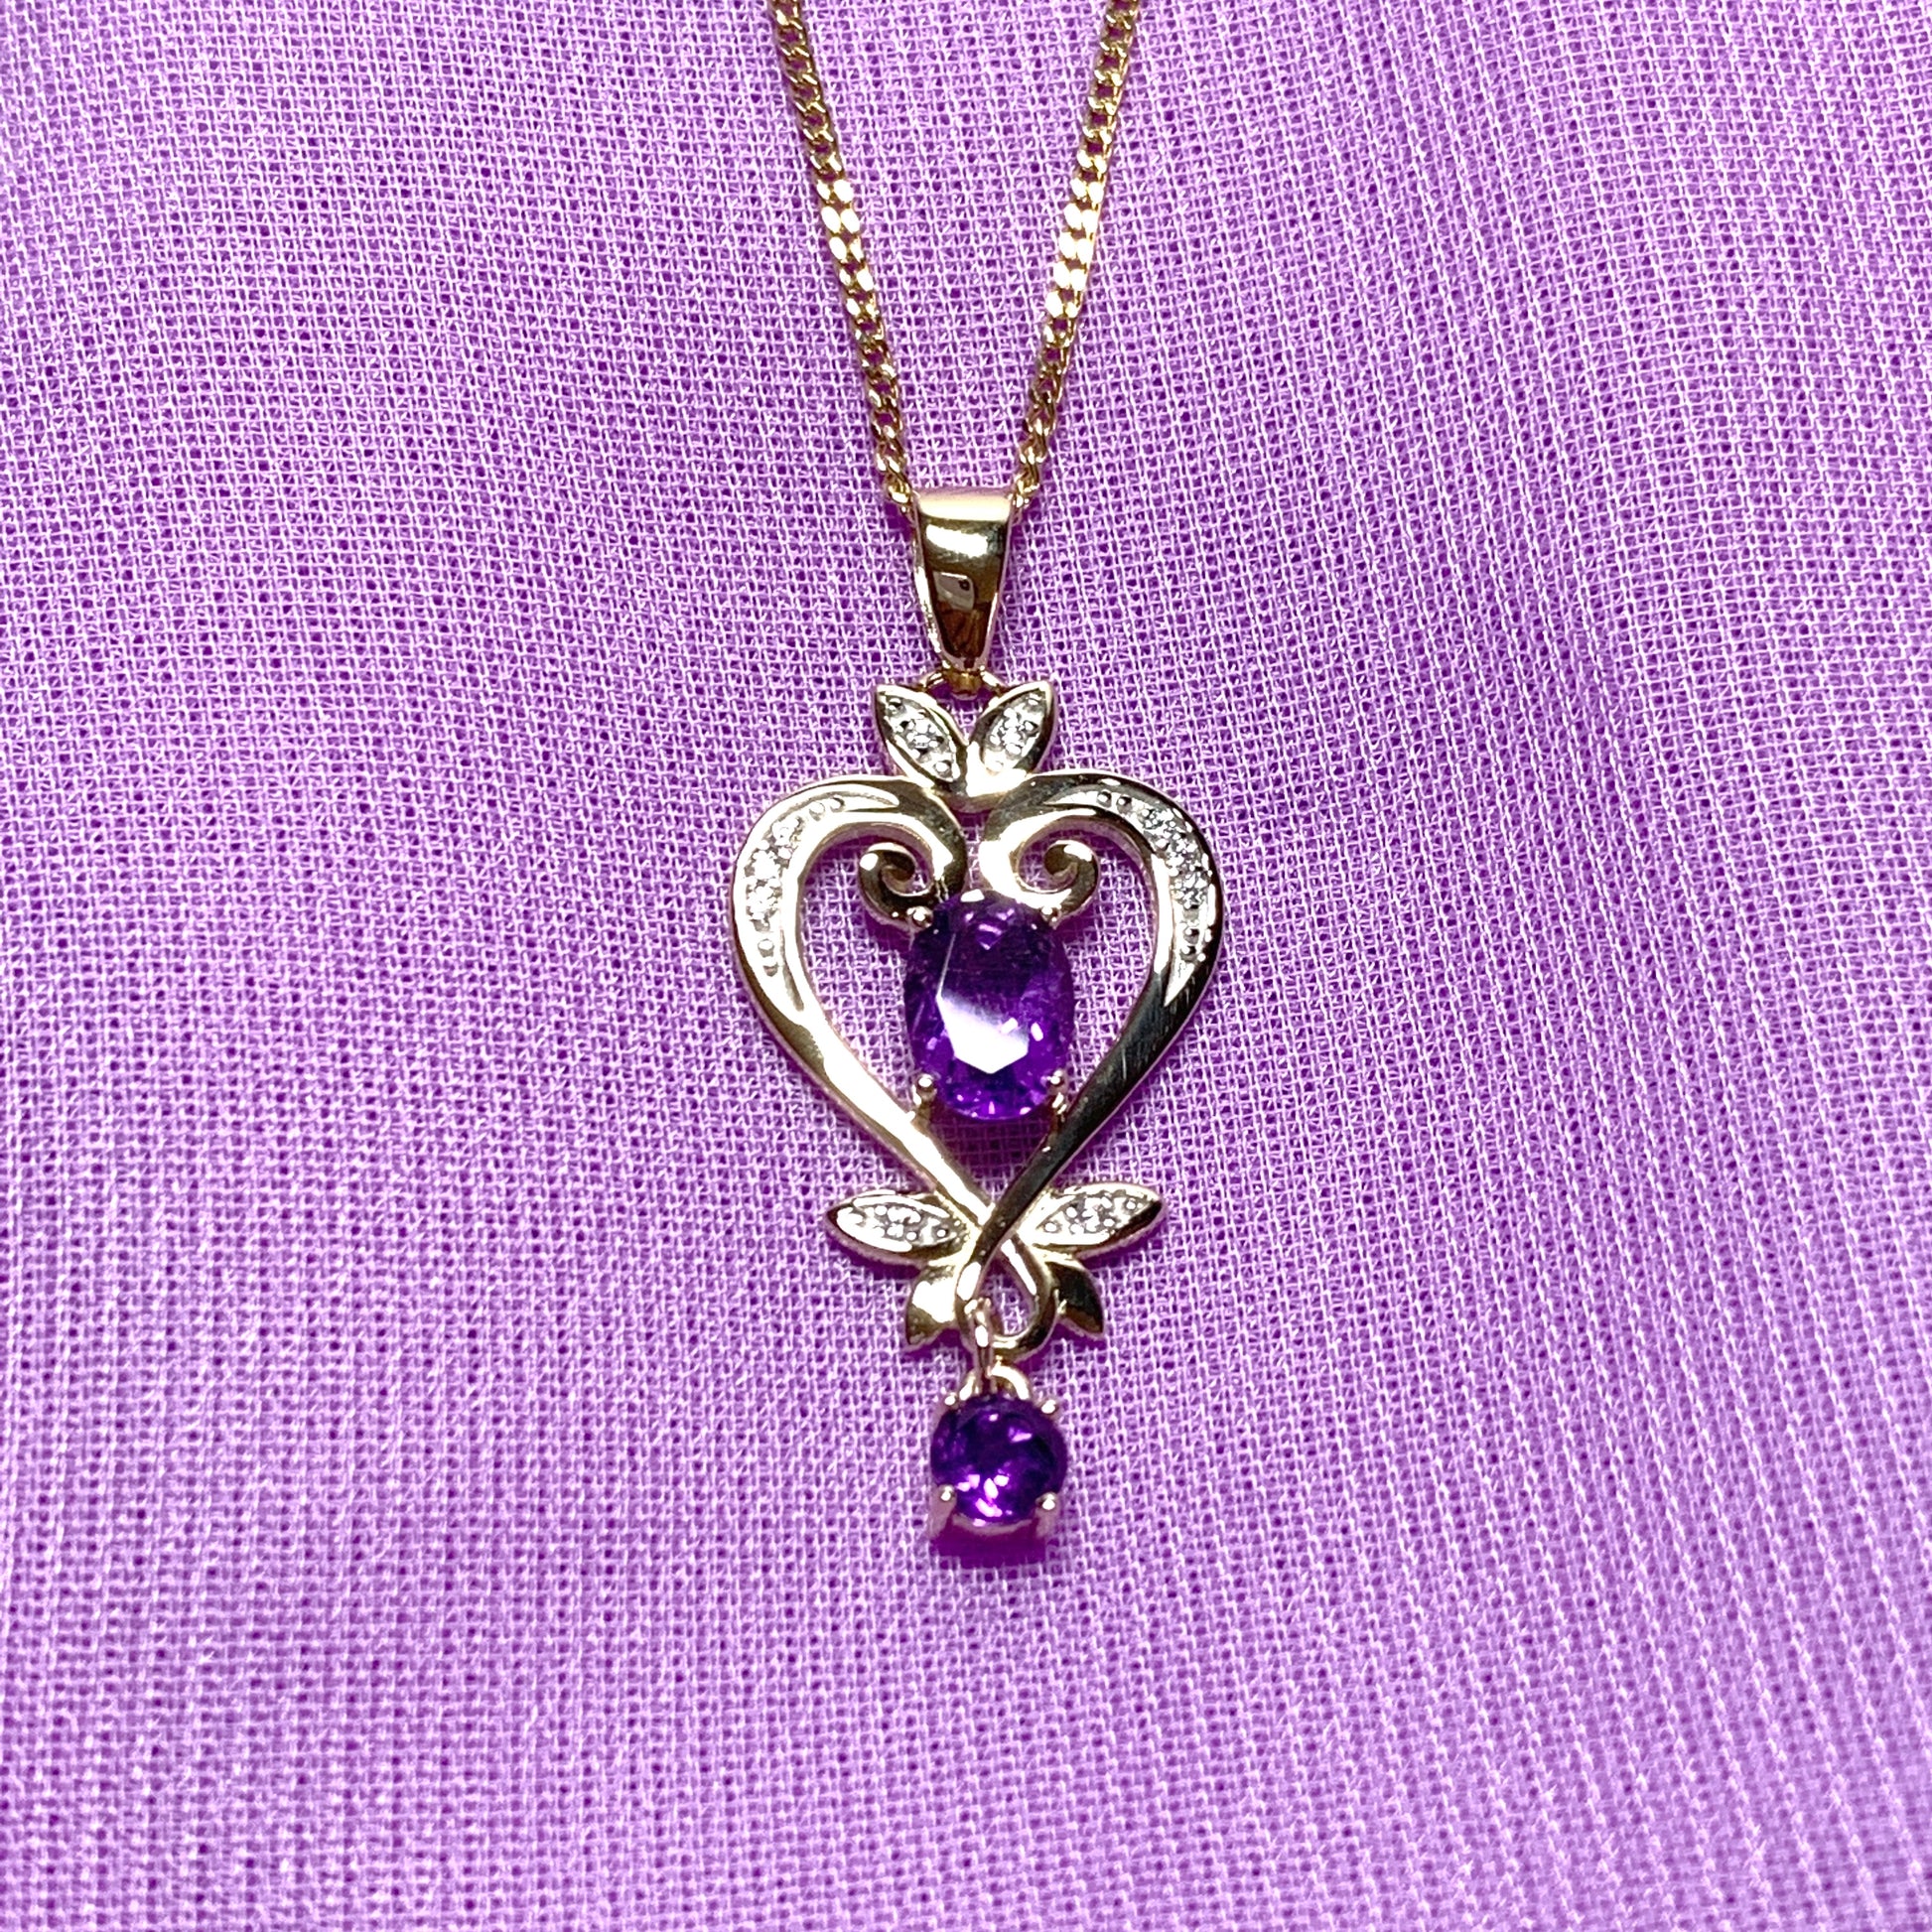 Heart shaped yellow gold and amethyst necklace pendent